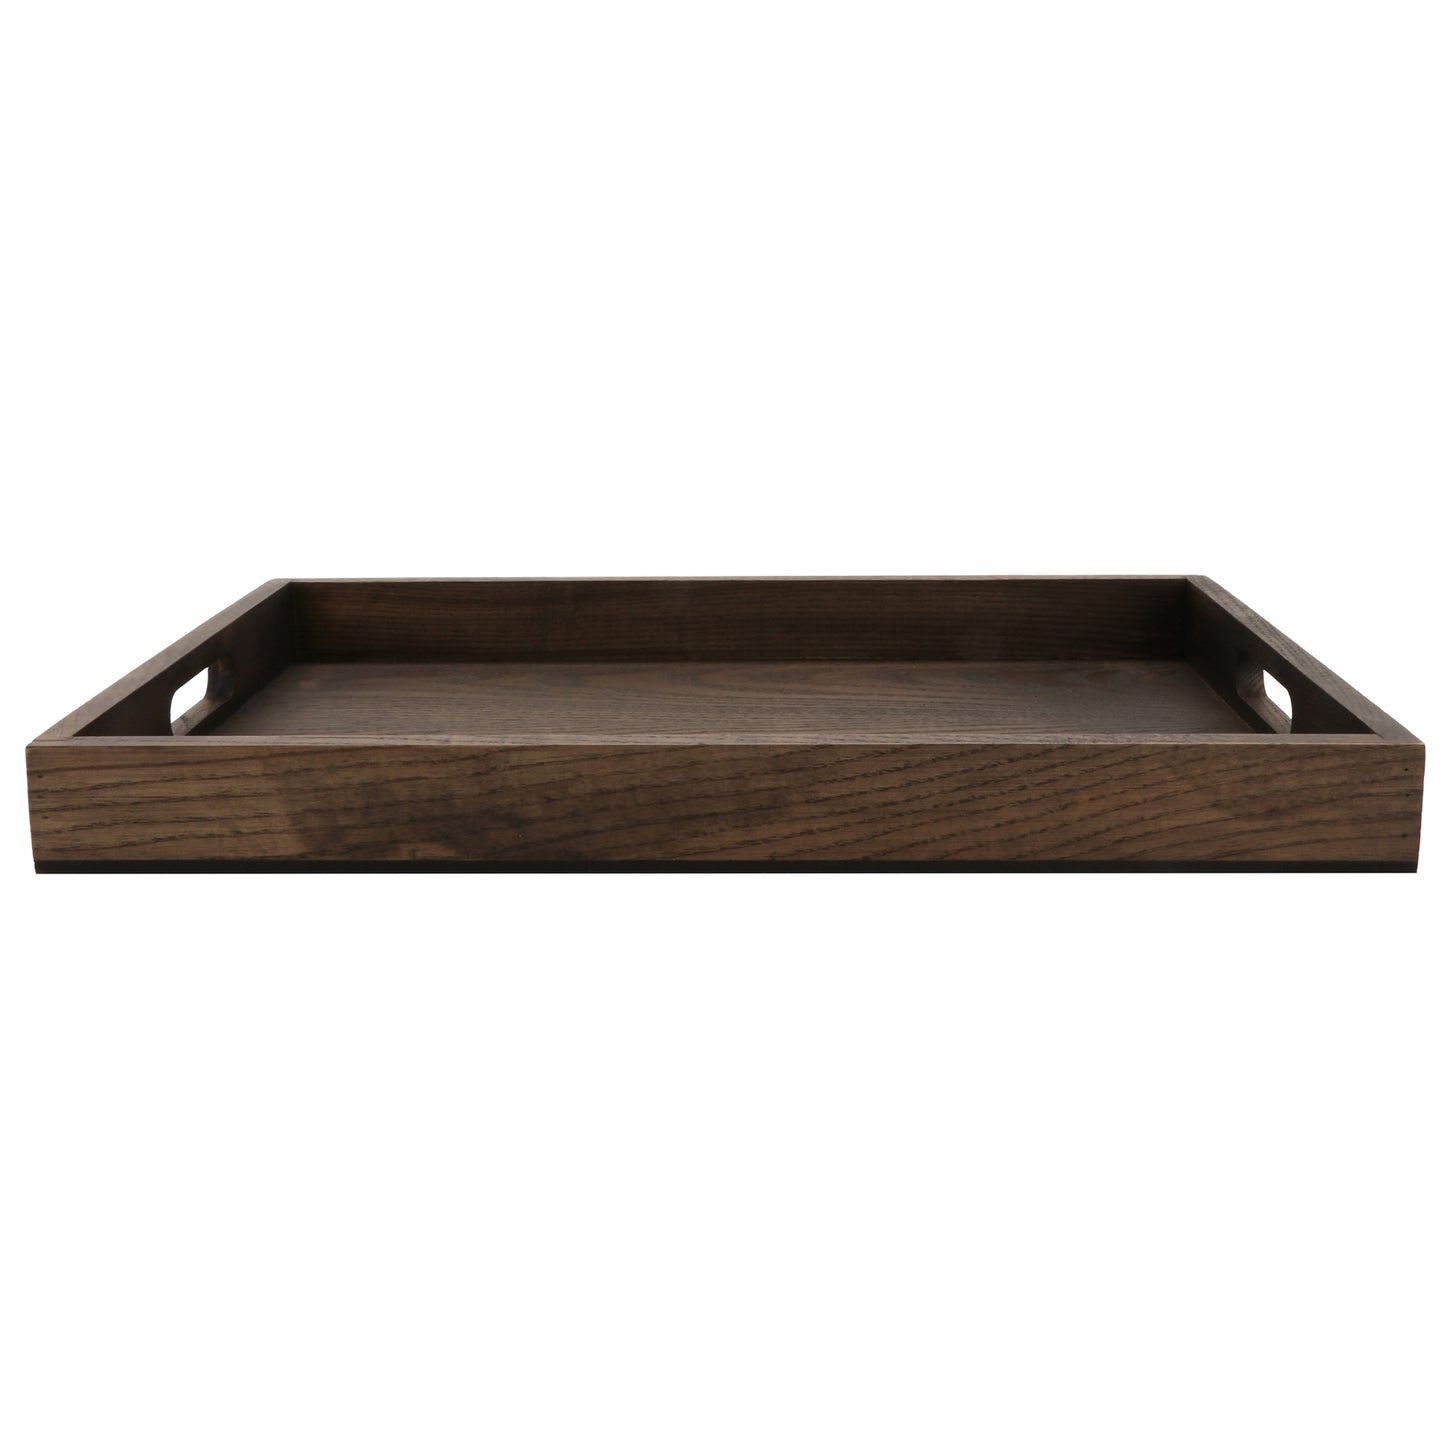 18.25" x 12.5" Large Rectangular Walled Ash Wood Serving Tray with Handles, 1.75" tall, G.E.T. Taproot